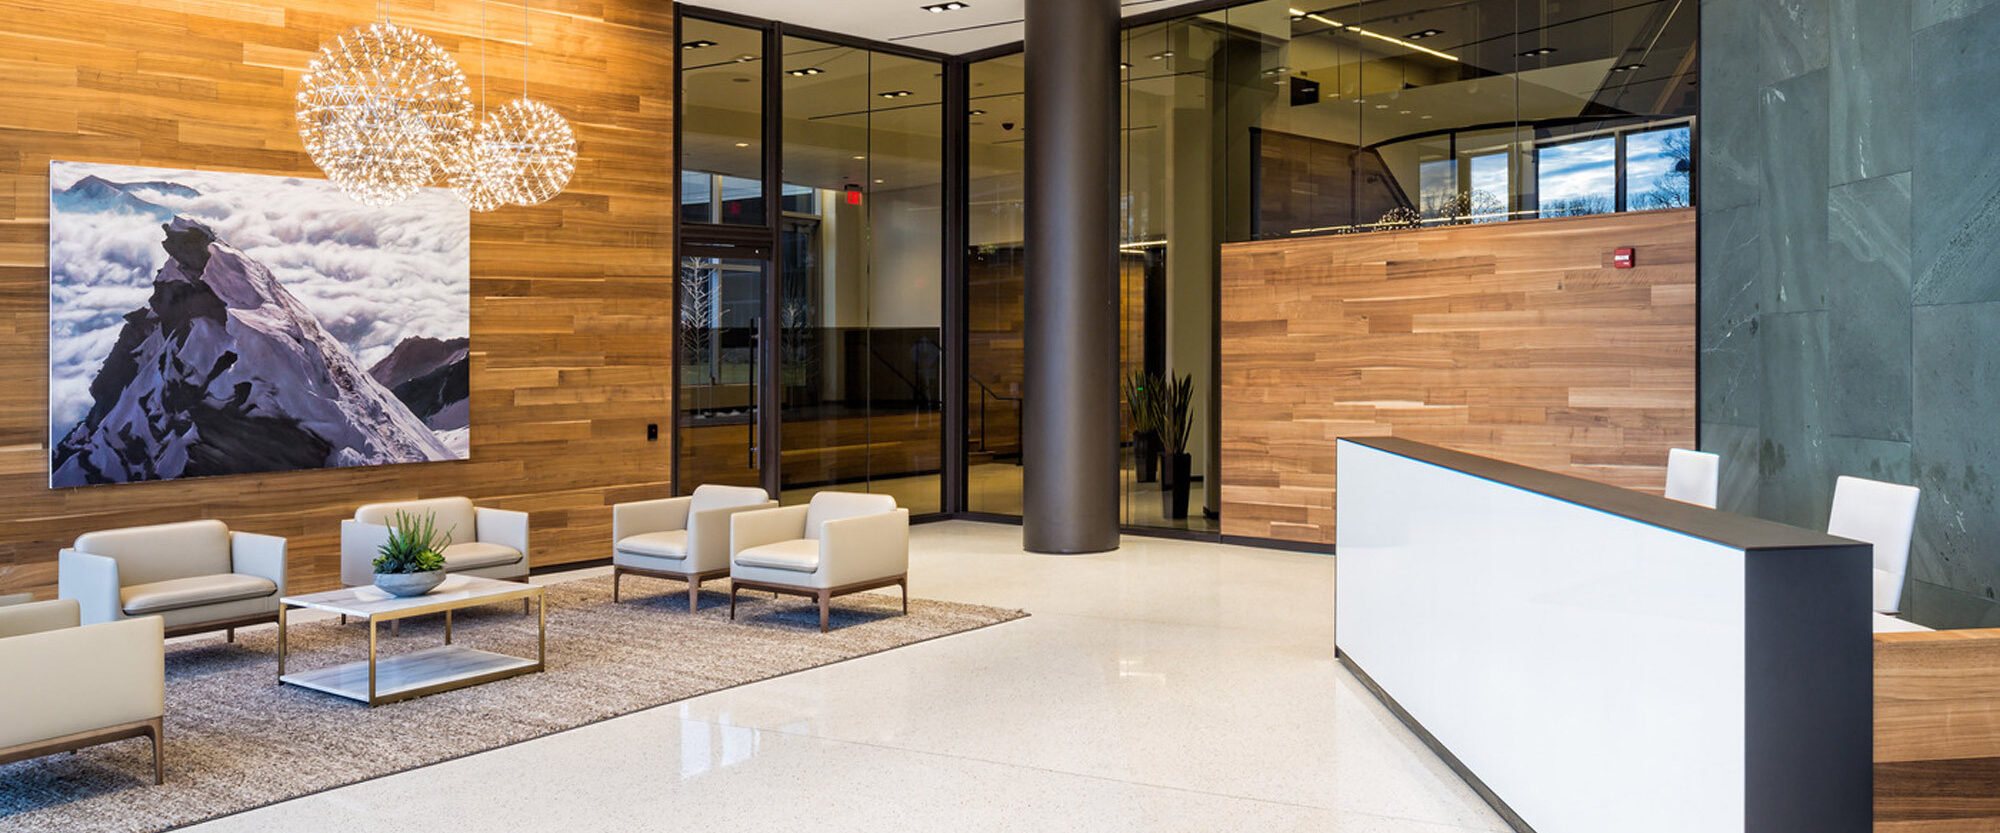 Modern corporate lobby featuring warm wooden wall panels, sleek white reception desk, and contemporary seating arrangement under artistic lighting fixtures, complemented by an oversized mountain landscape painting.